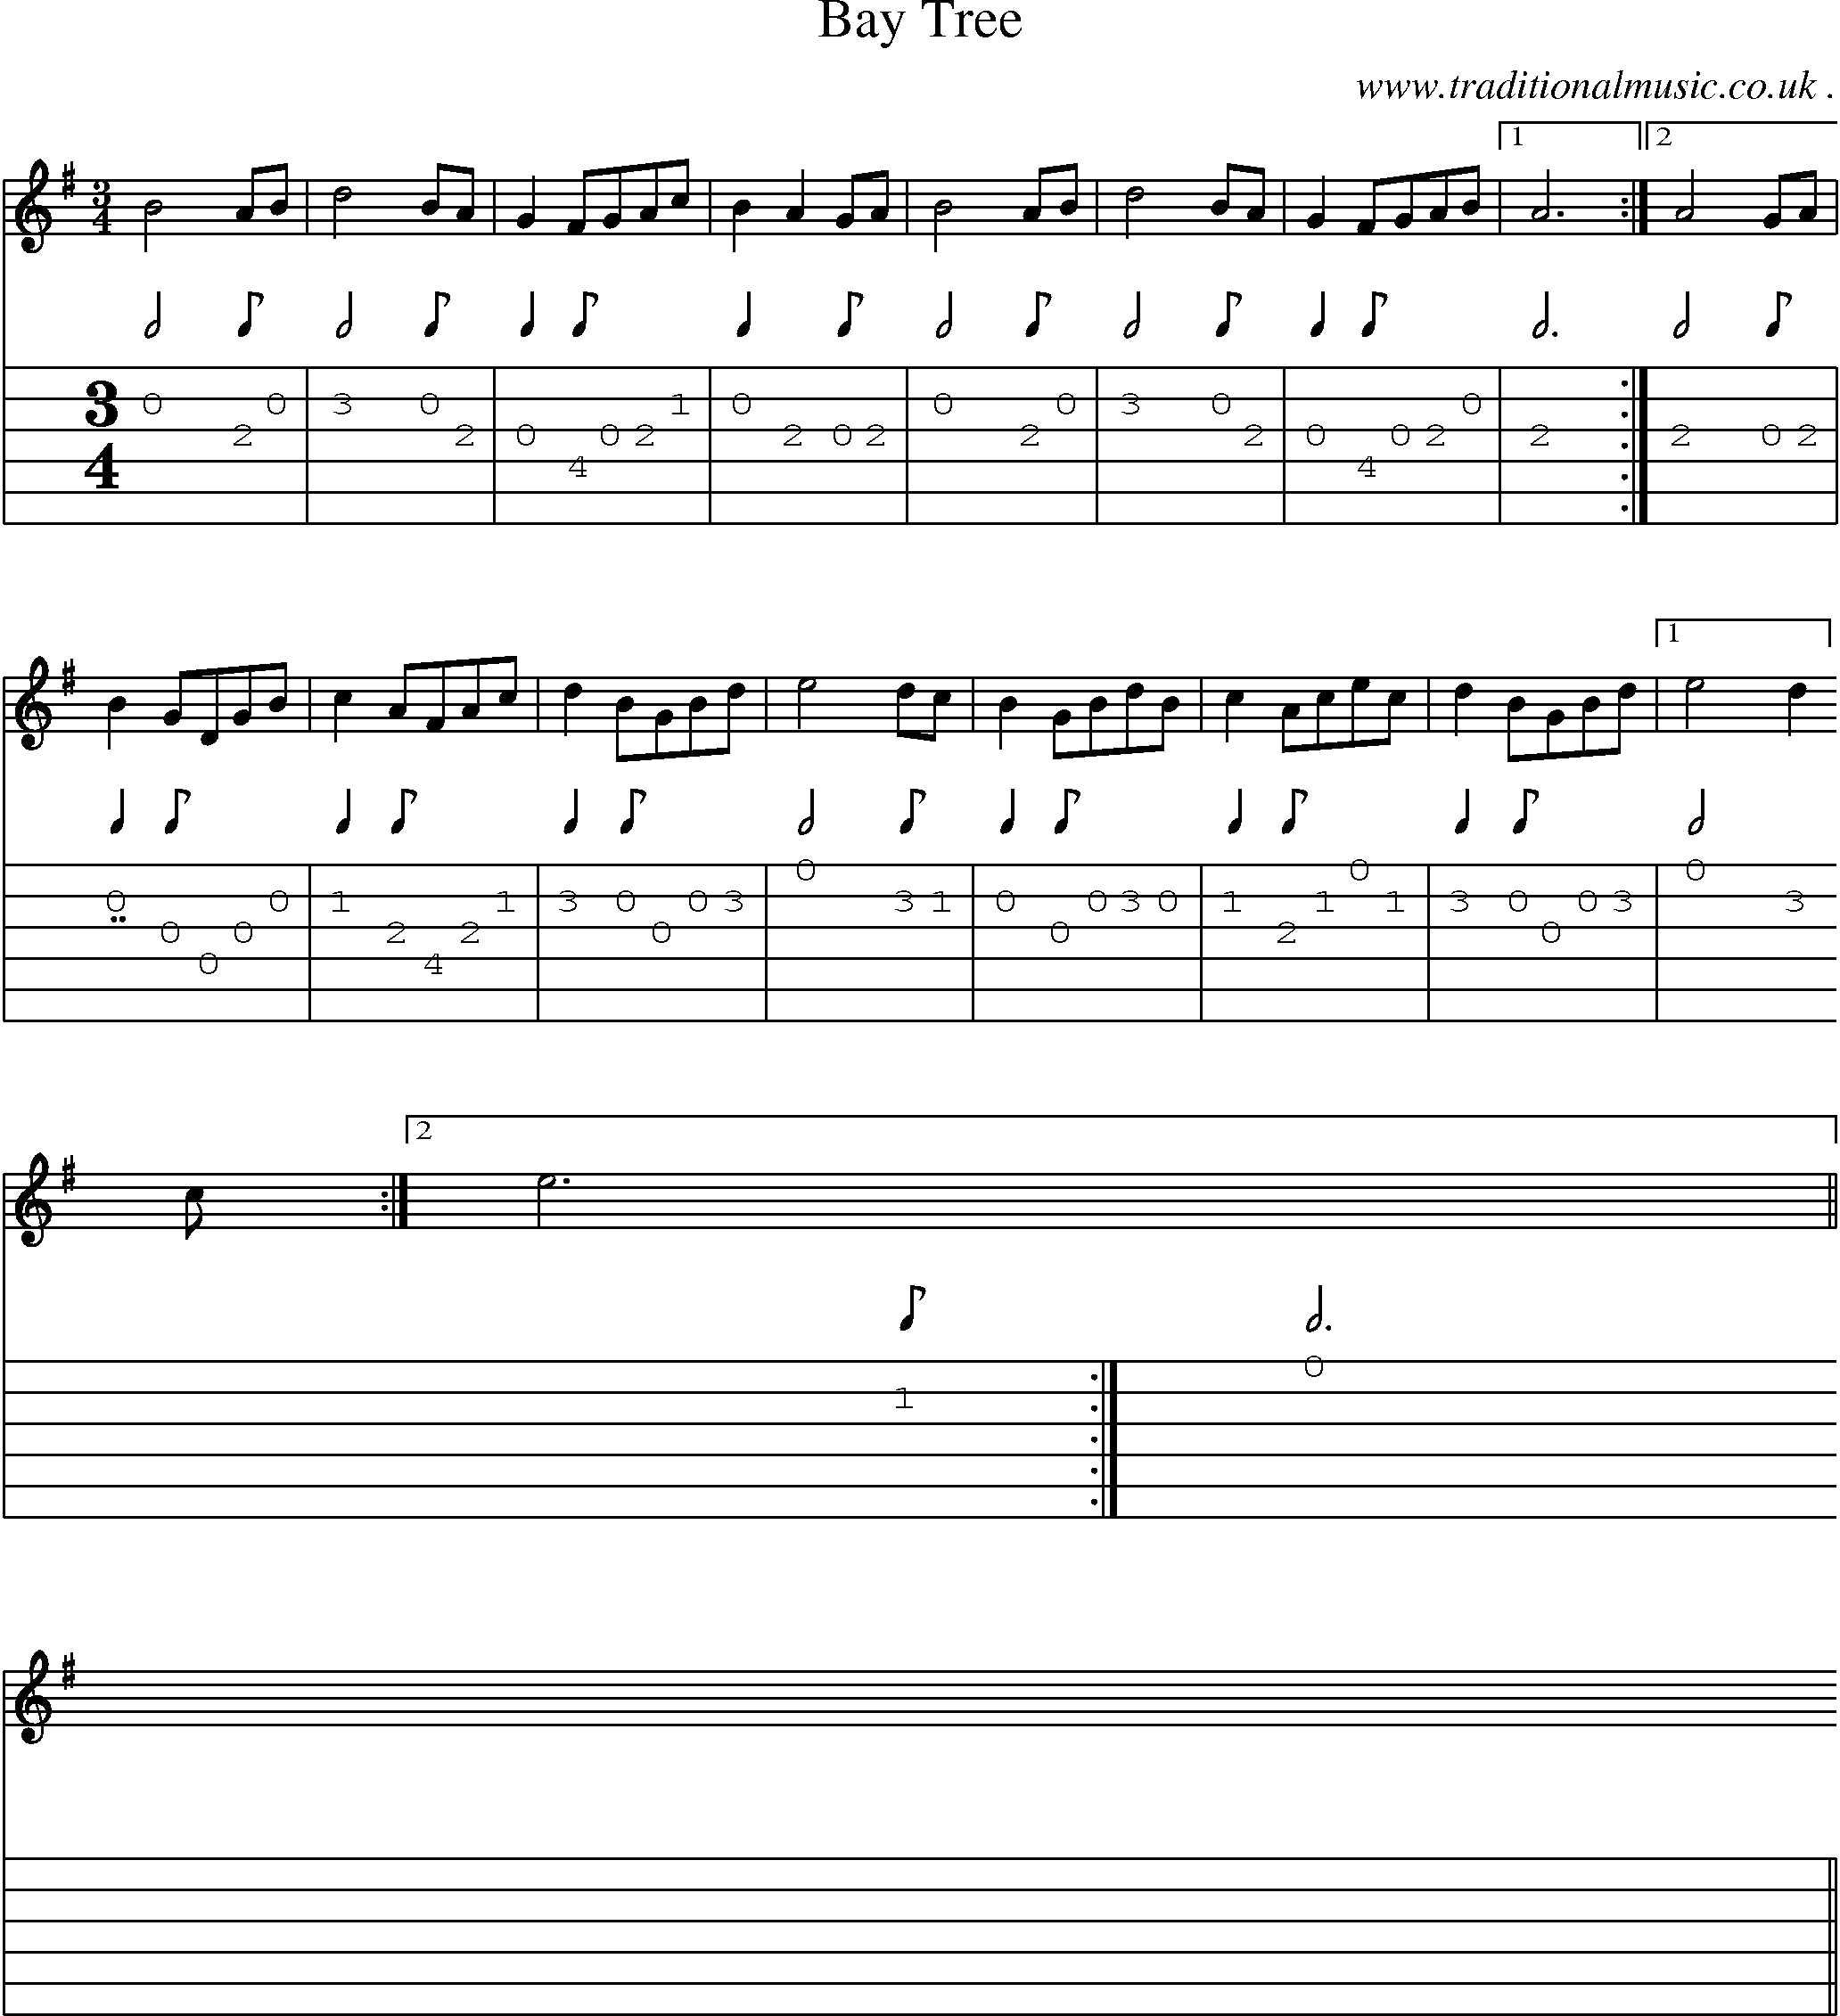 Sheet-Music and Guitar Tabs for Bay Tree